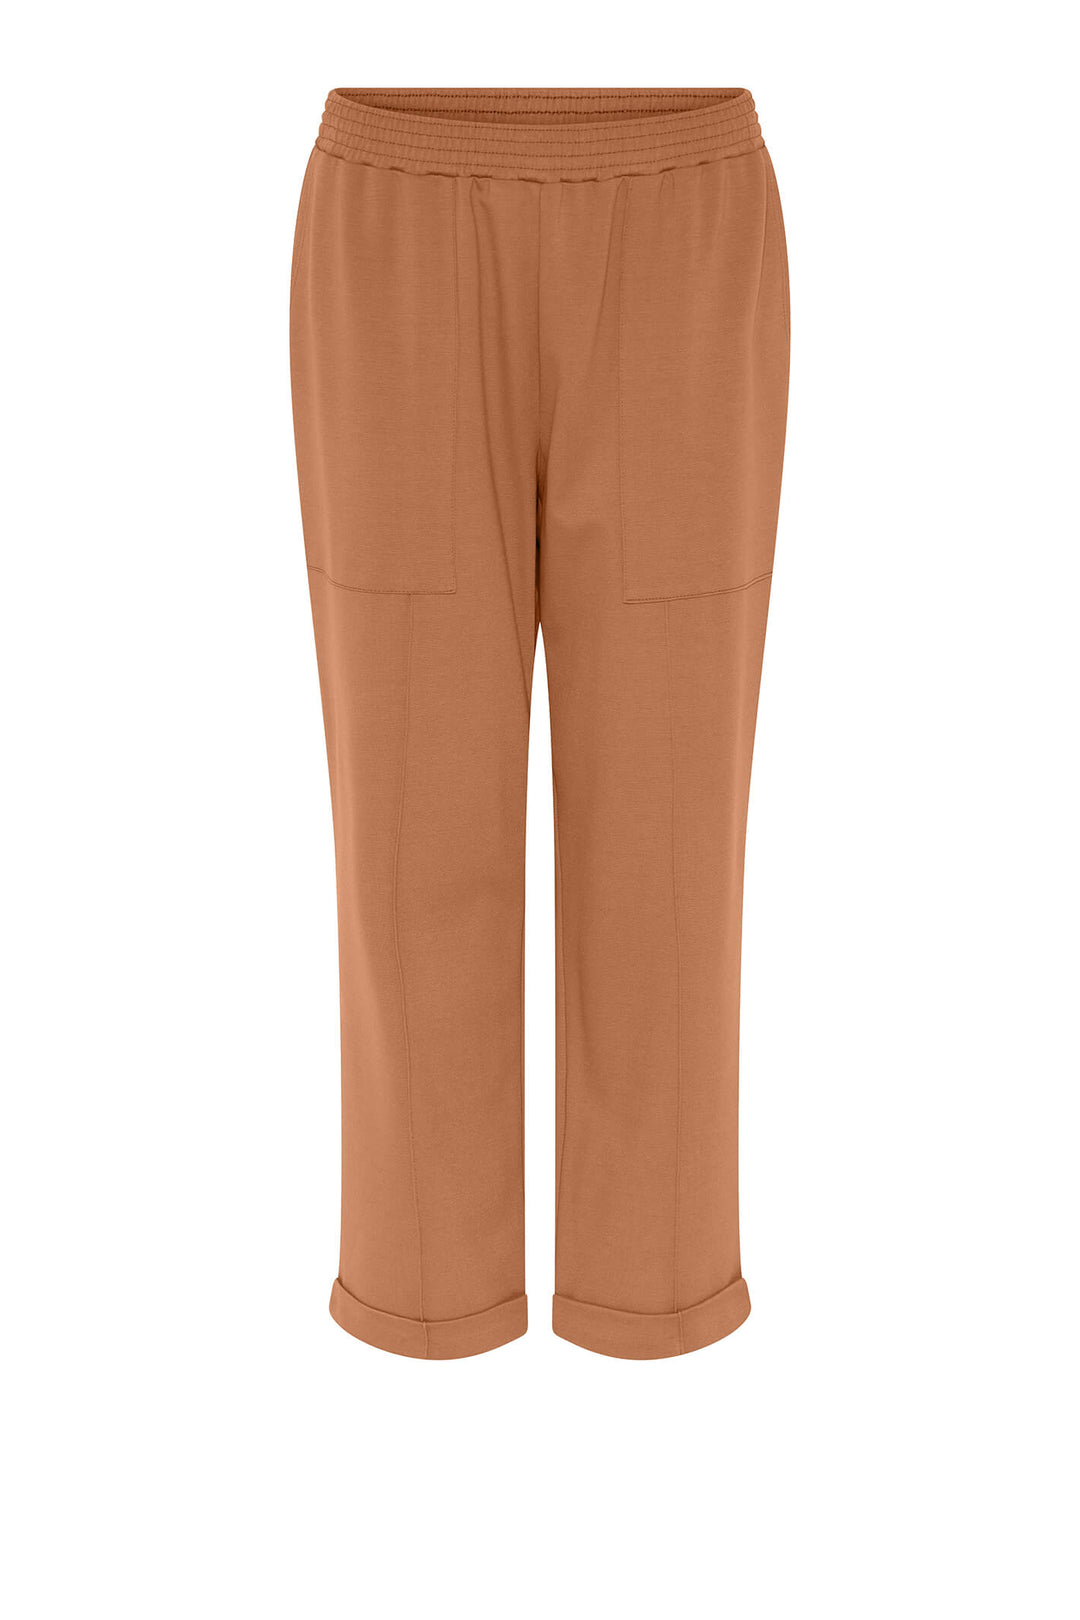 Que 31091 17 Tan Brown Pull On Trousers - Experience Boiutique